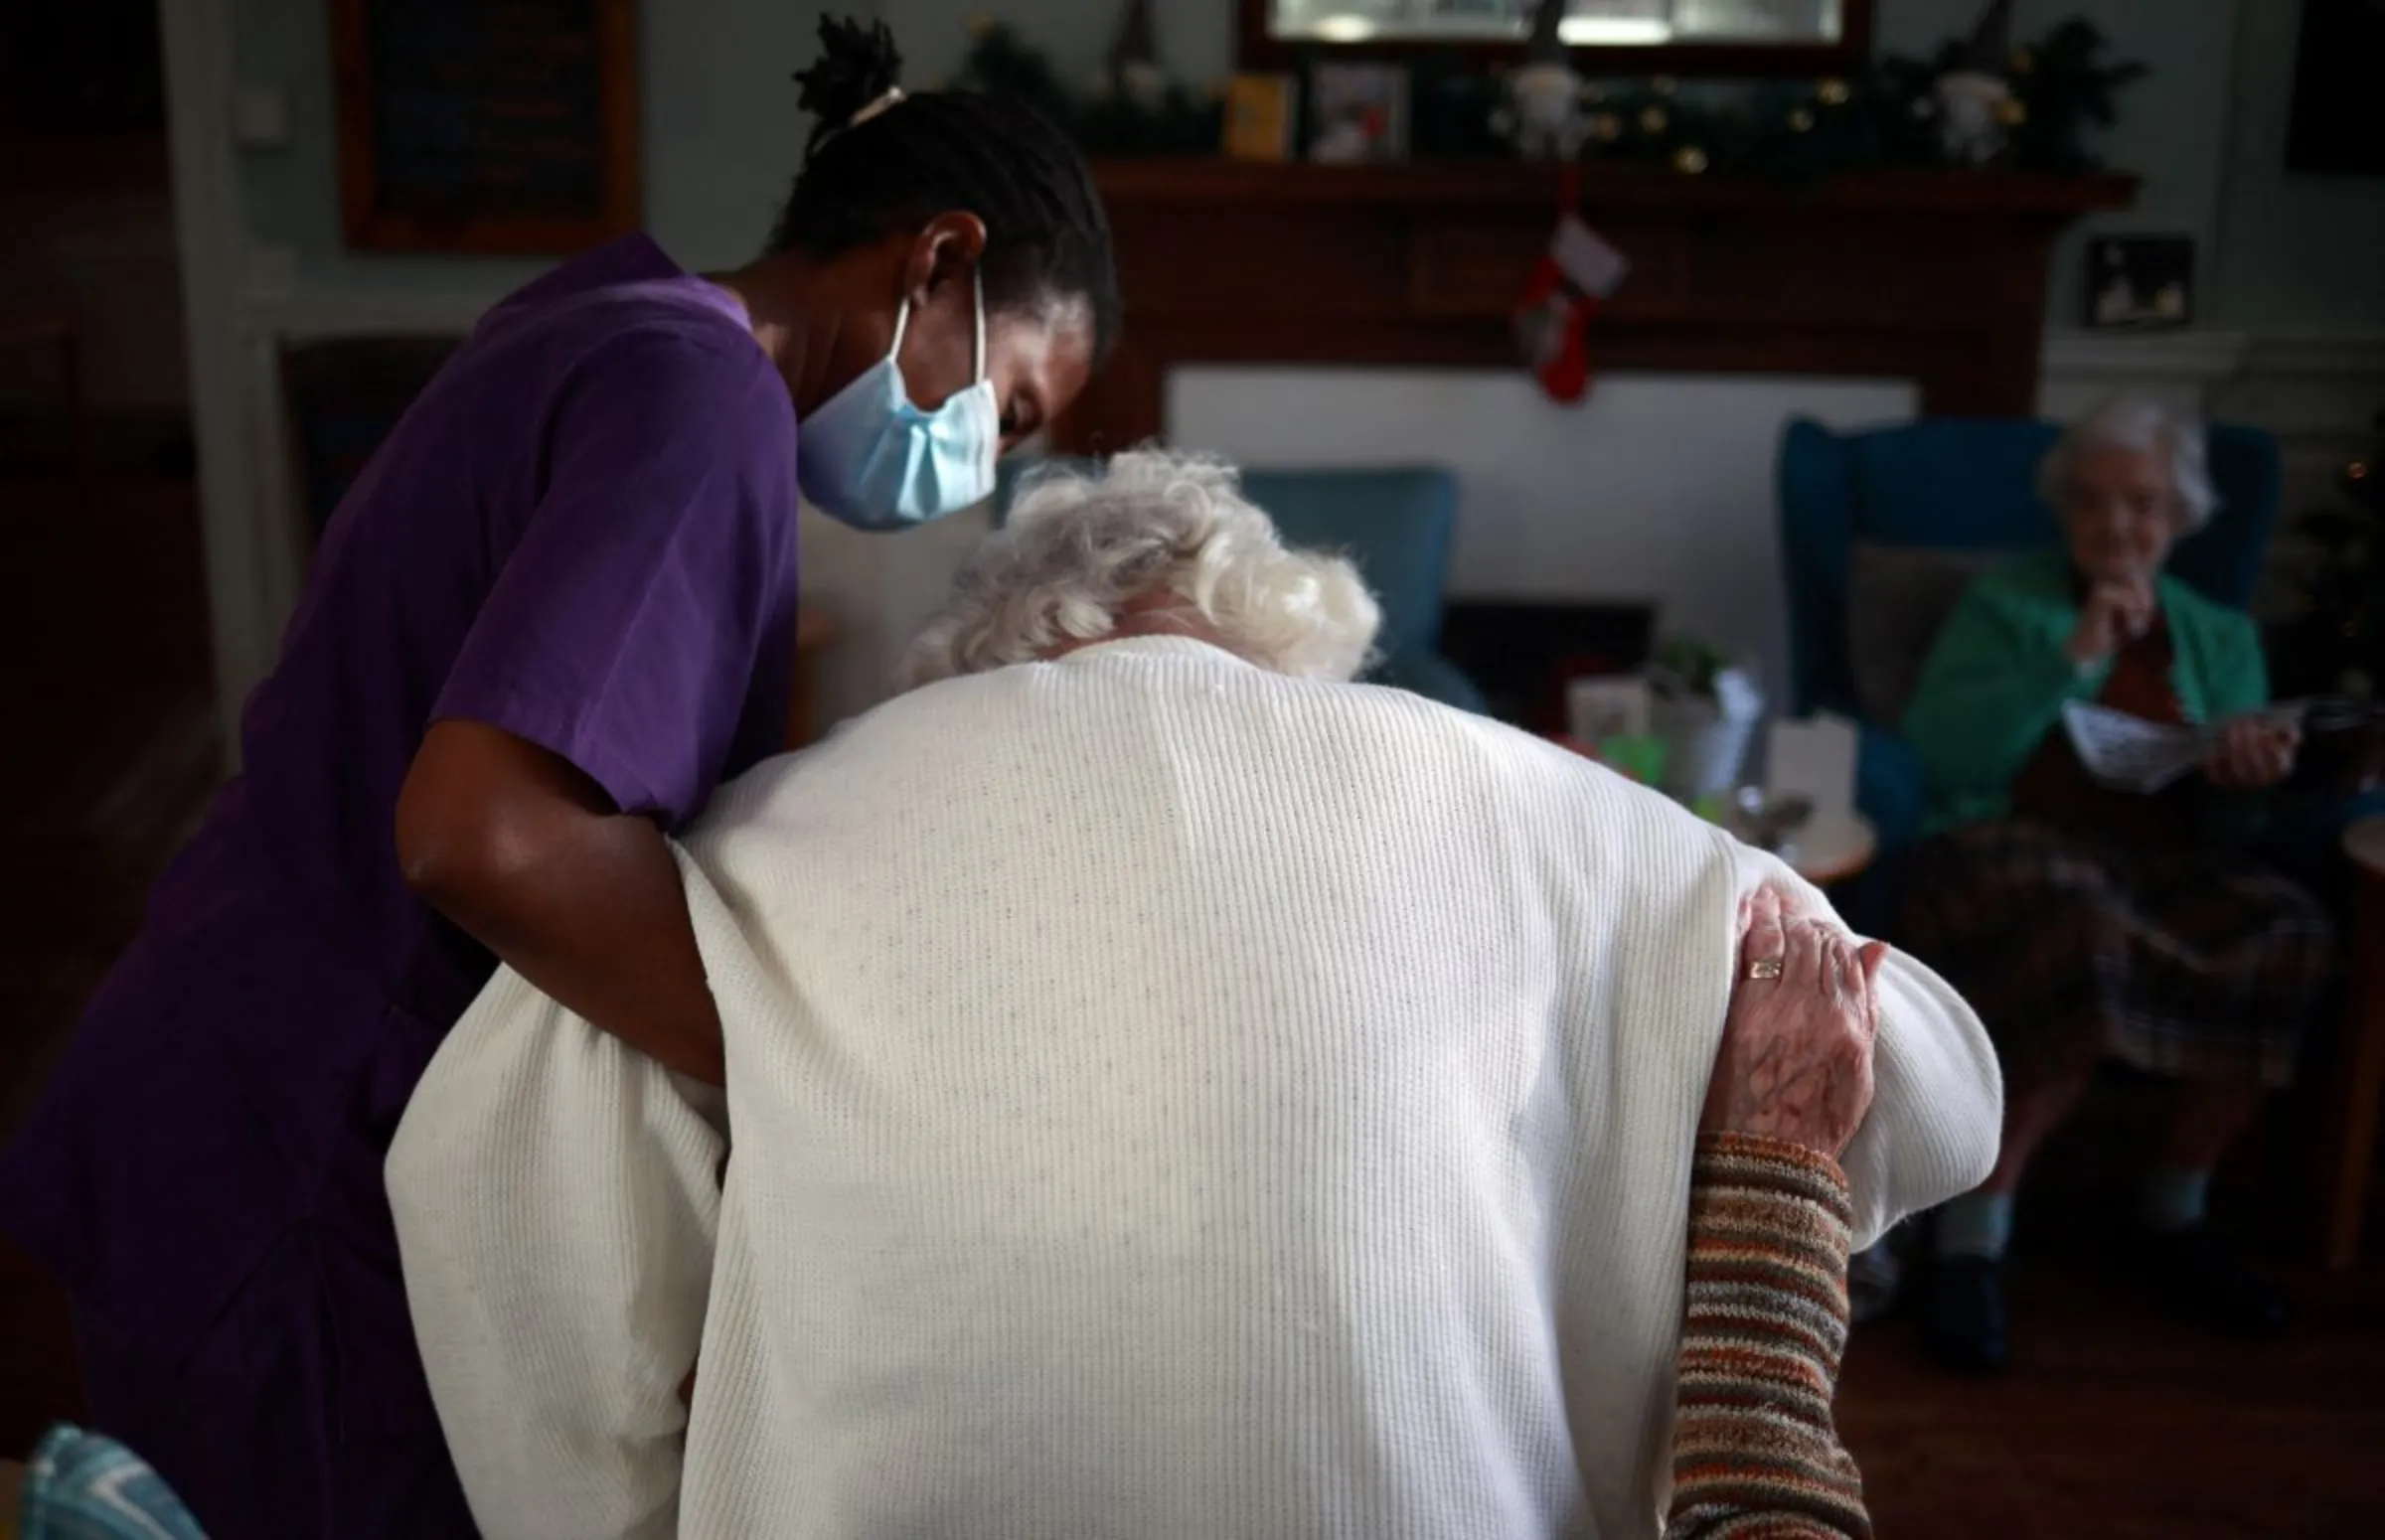 A care worker assists a resident at a care home in south London, Britain, December 25, 2020. REUTERS/Hannah McKay